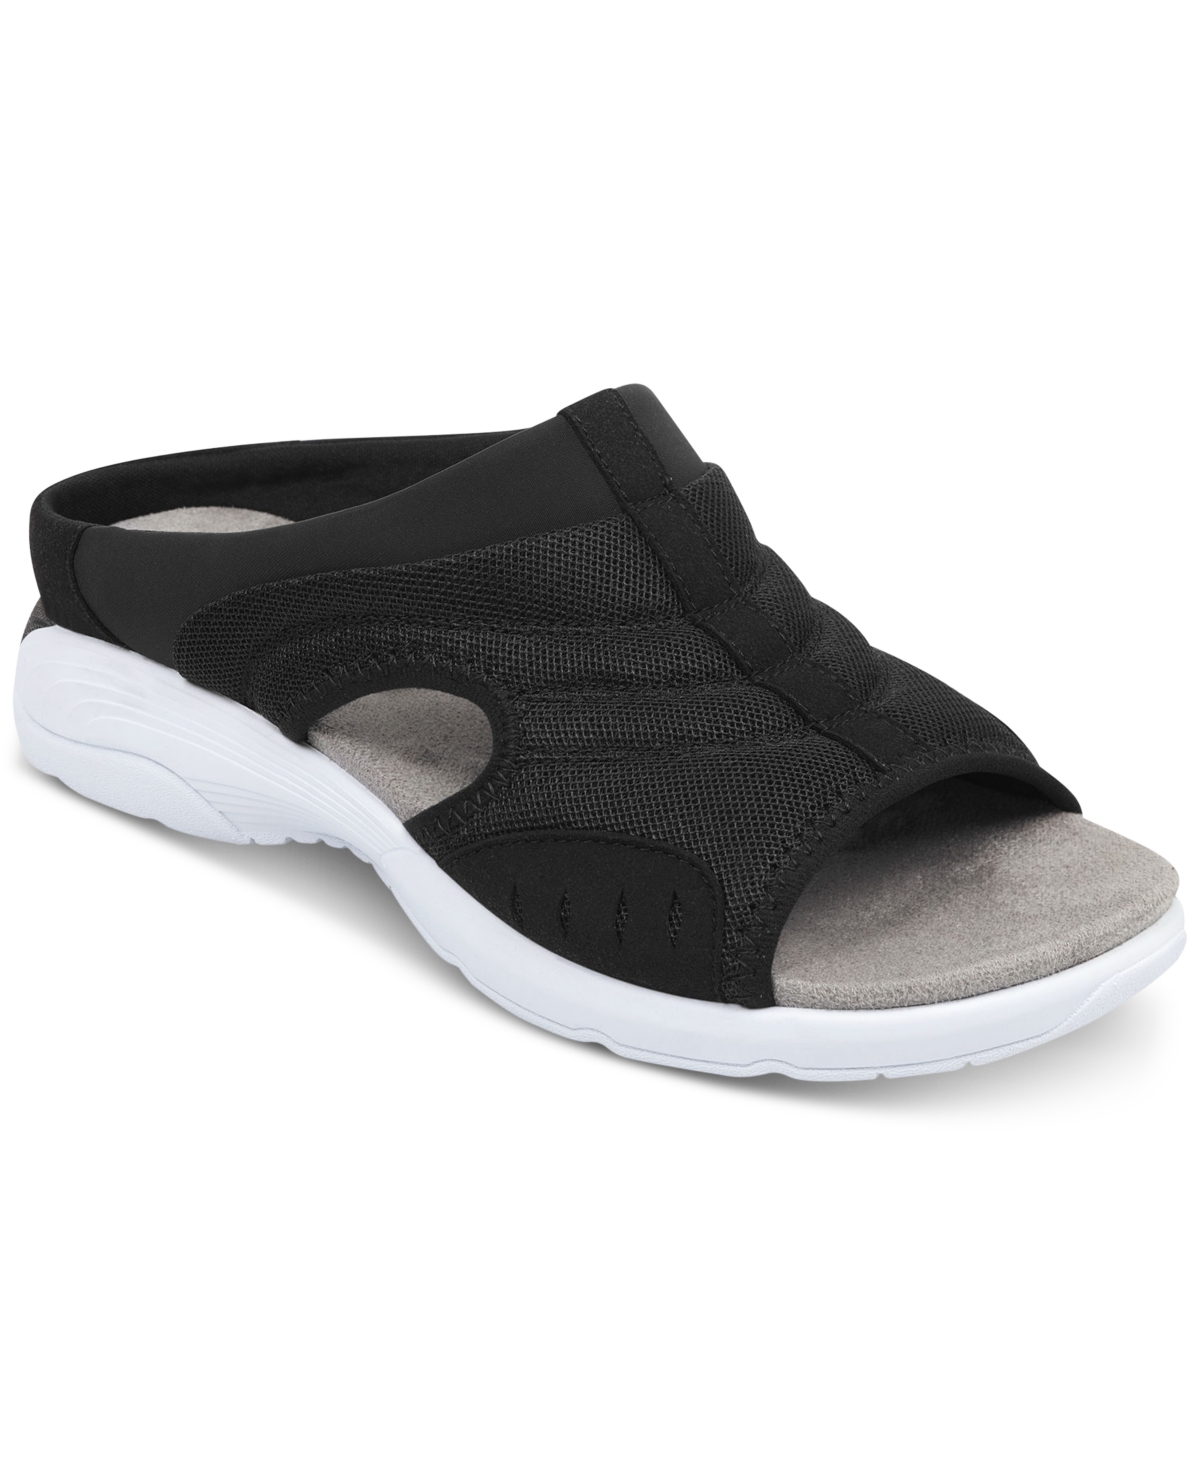 UPC 192733306426 product image for Easy Spirit Women's Traciee Square Toe Casual Flat Sandals Women's Shoes | upcitemdb.com